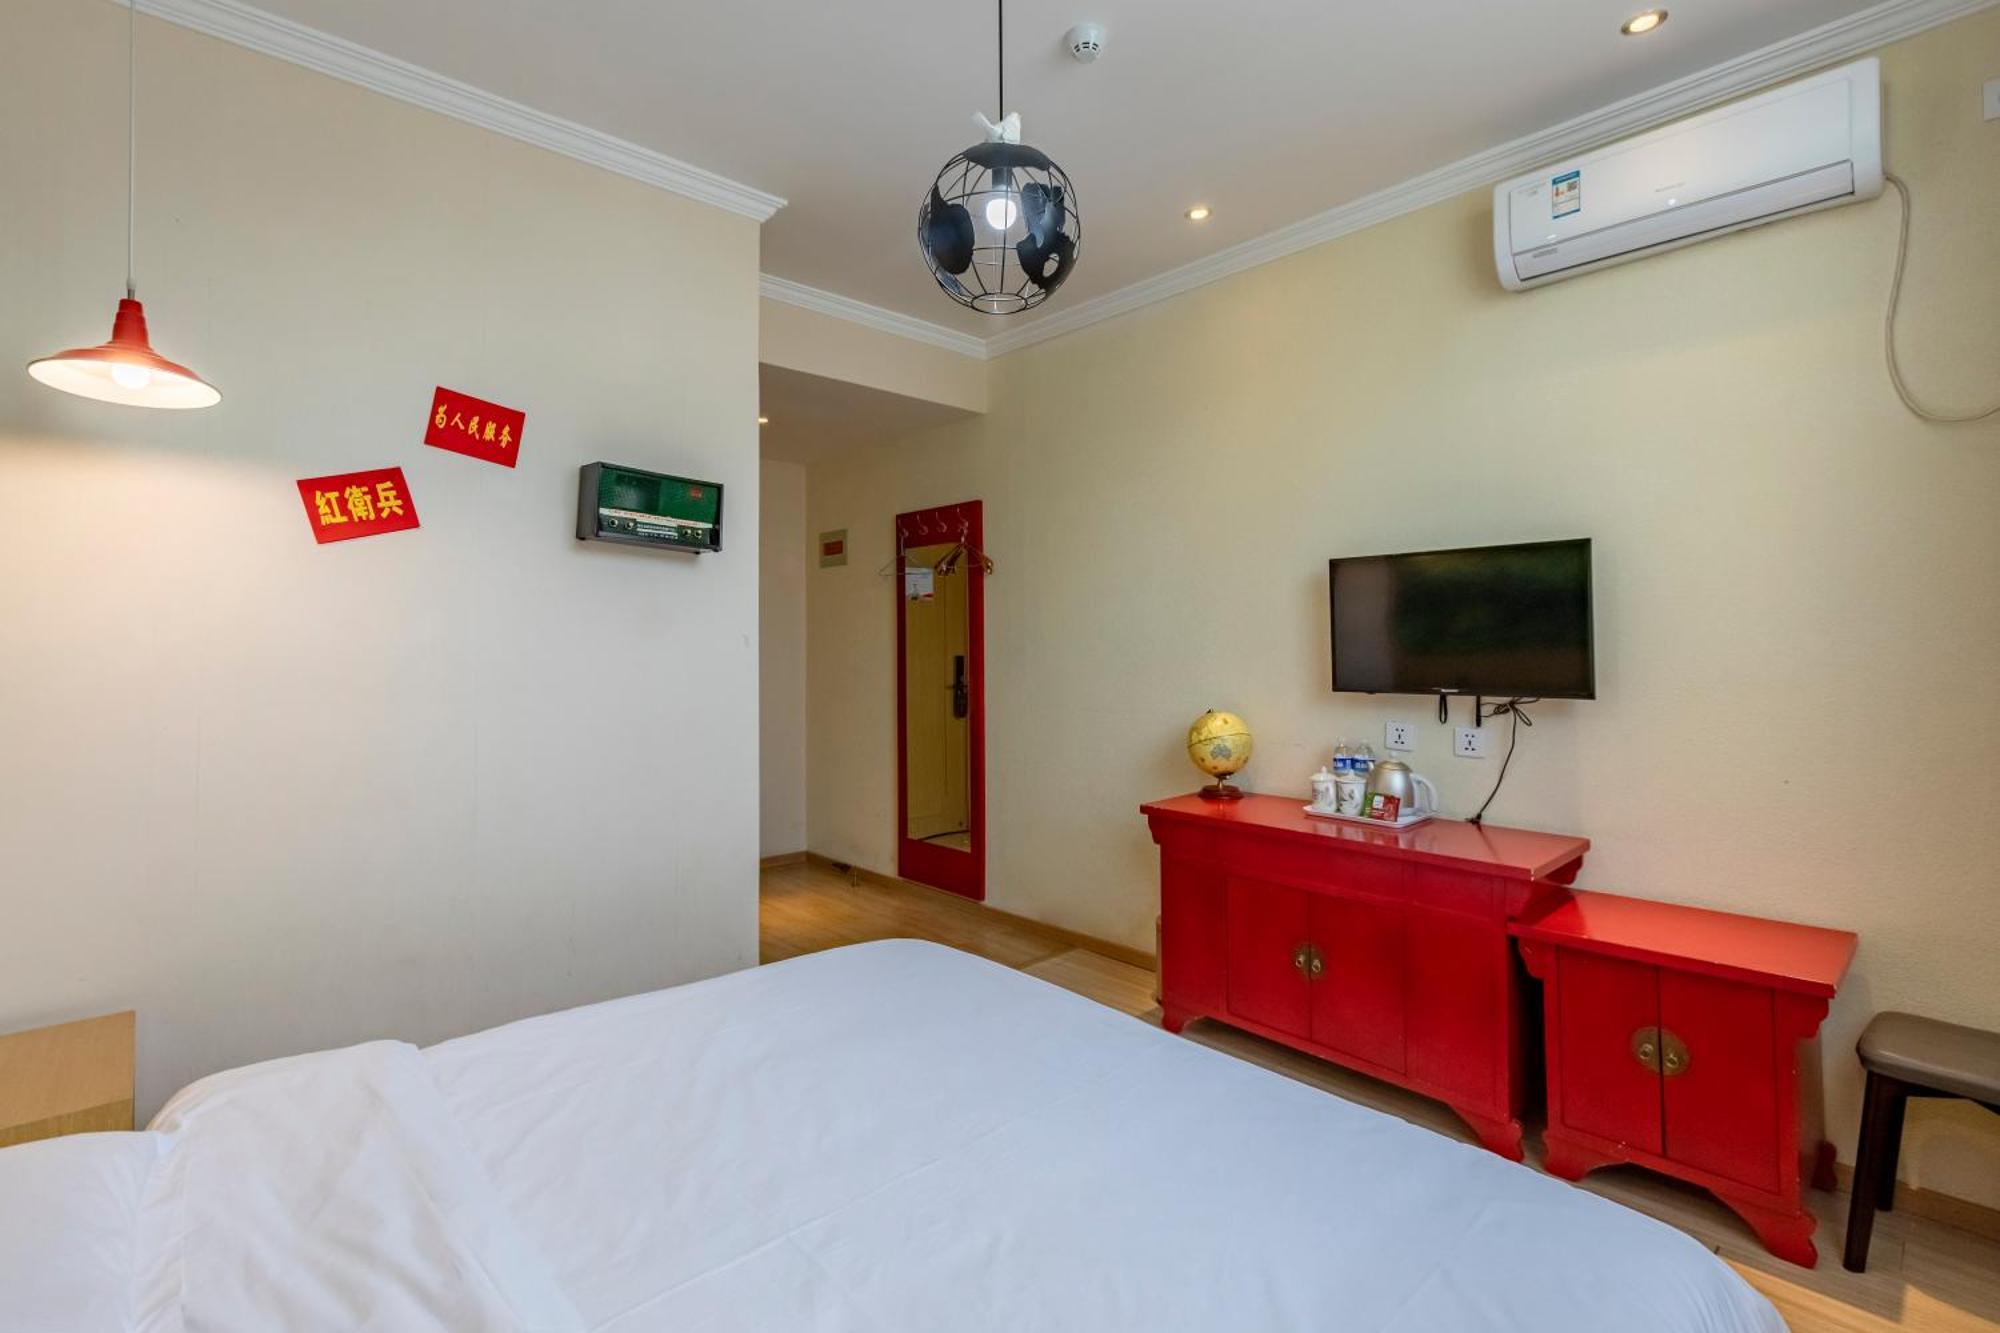 Happy Dragon Alley Hotel-In The City Center With Big Window&Free Coffe, Fluent English Speaking,Tourist Attractions Ticket Service&Food Recommendation,Near Tian Anmen Forbiddencity,Near Lama Temple,Easy To Walk To Nanluoalley&Shichahai 베이징 외부 사진